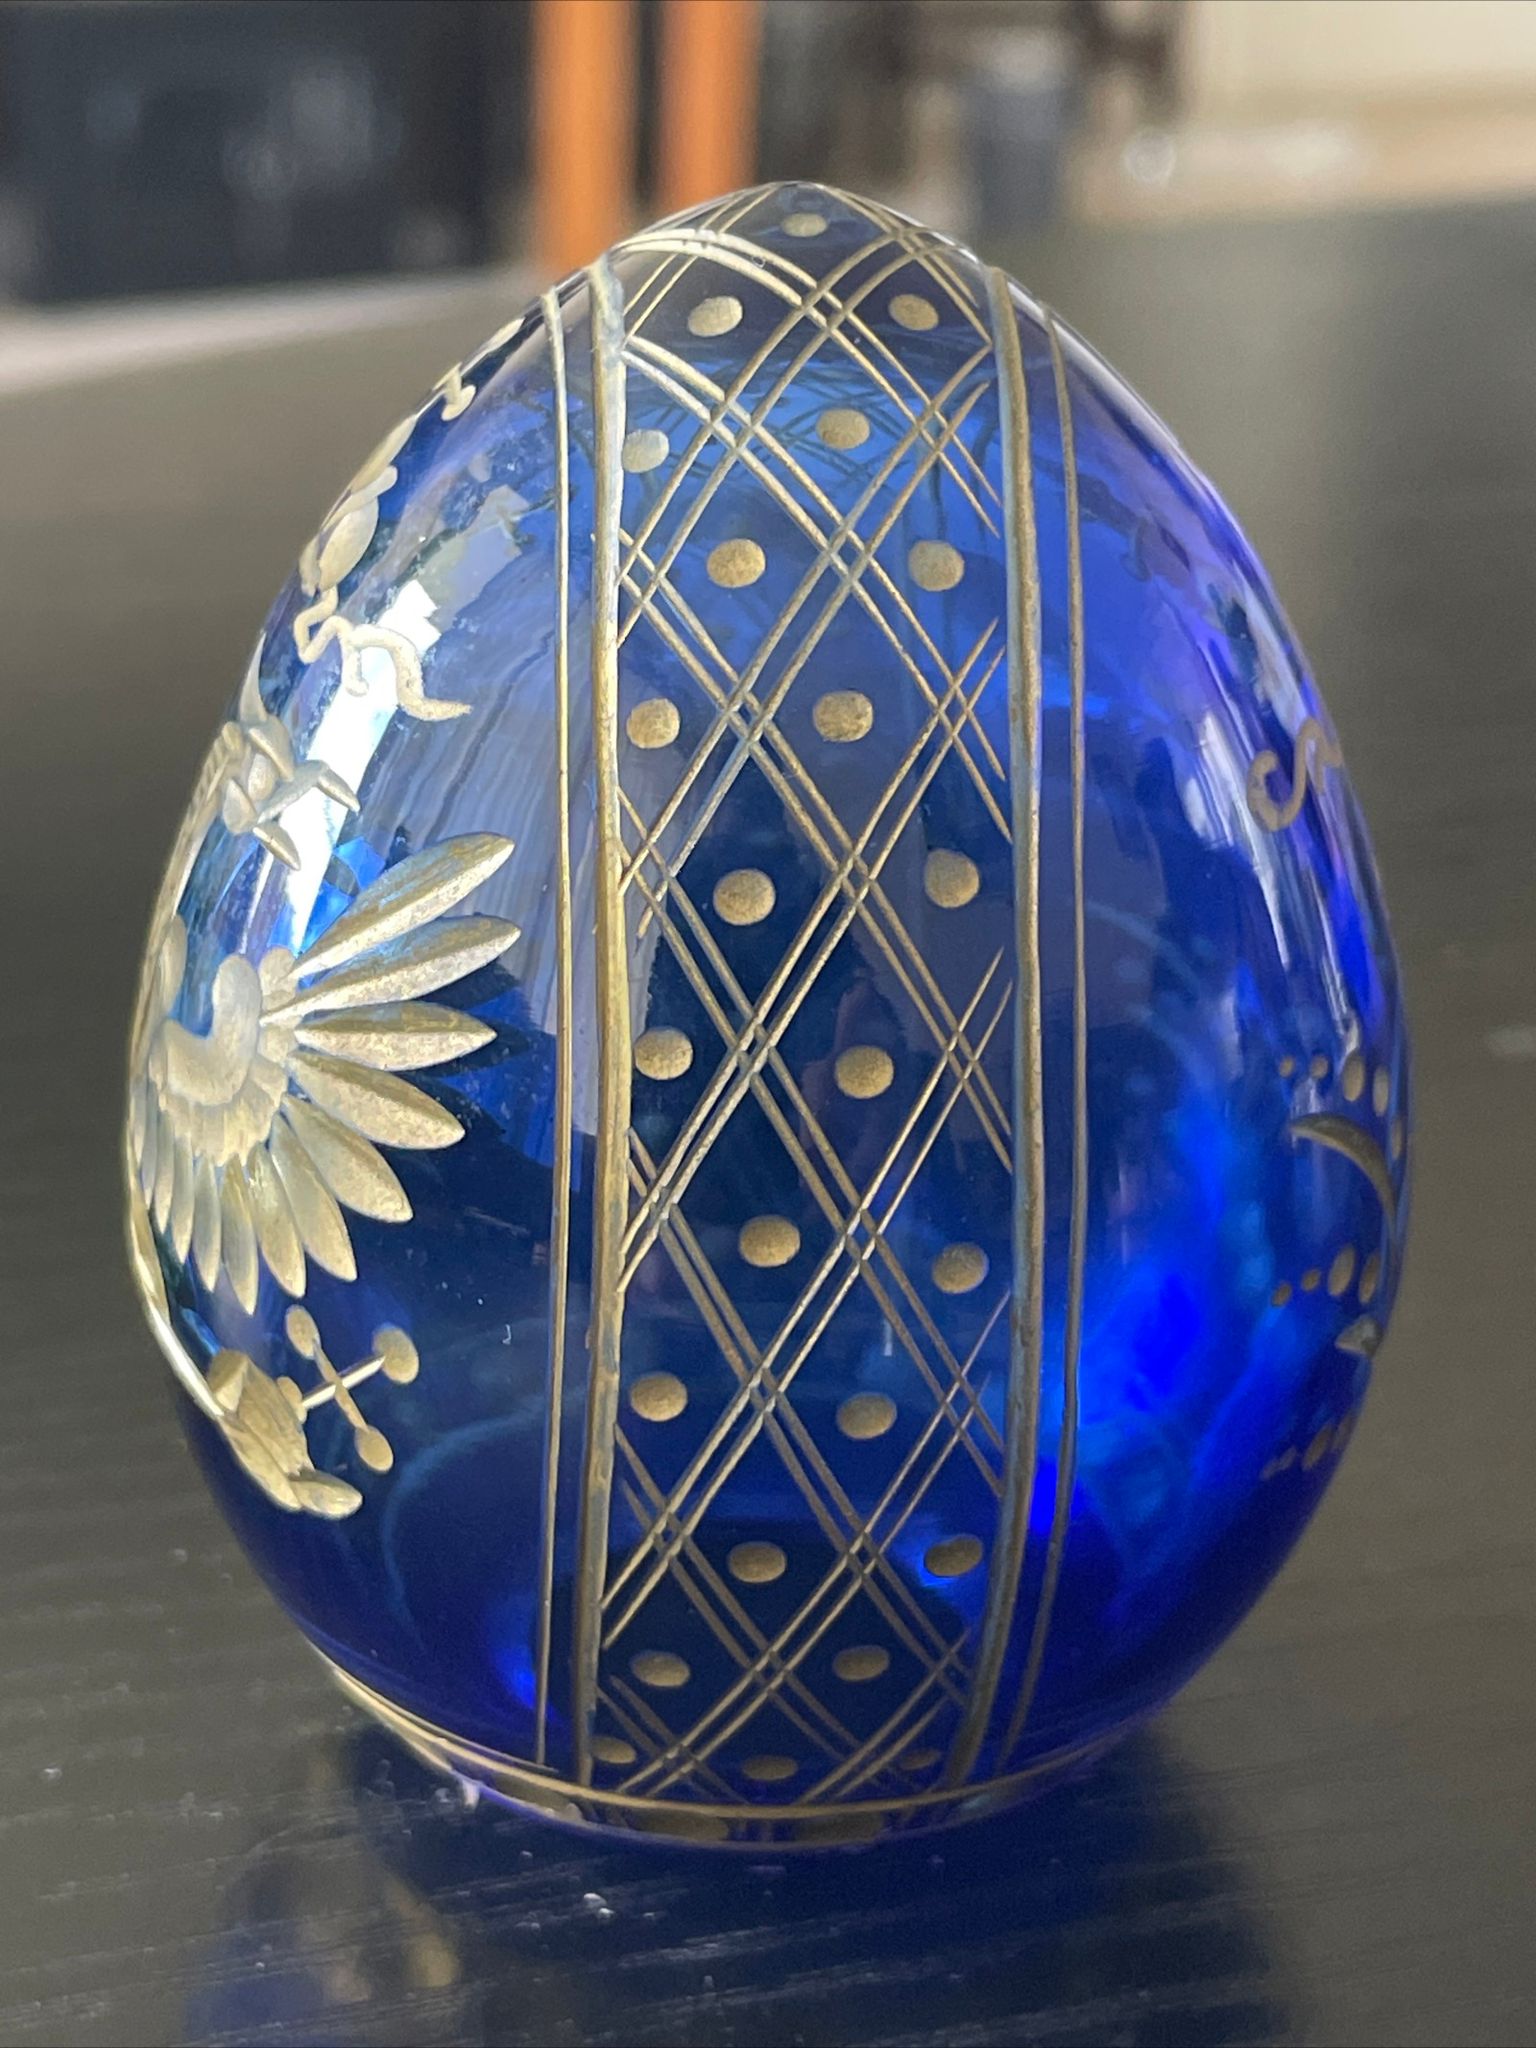 FABERGE STYLE RUSSIAN BLUE GLASS EGG IN EXCELLENT CONDITION - Image 4 of 4